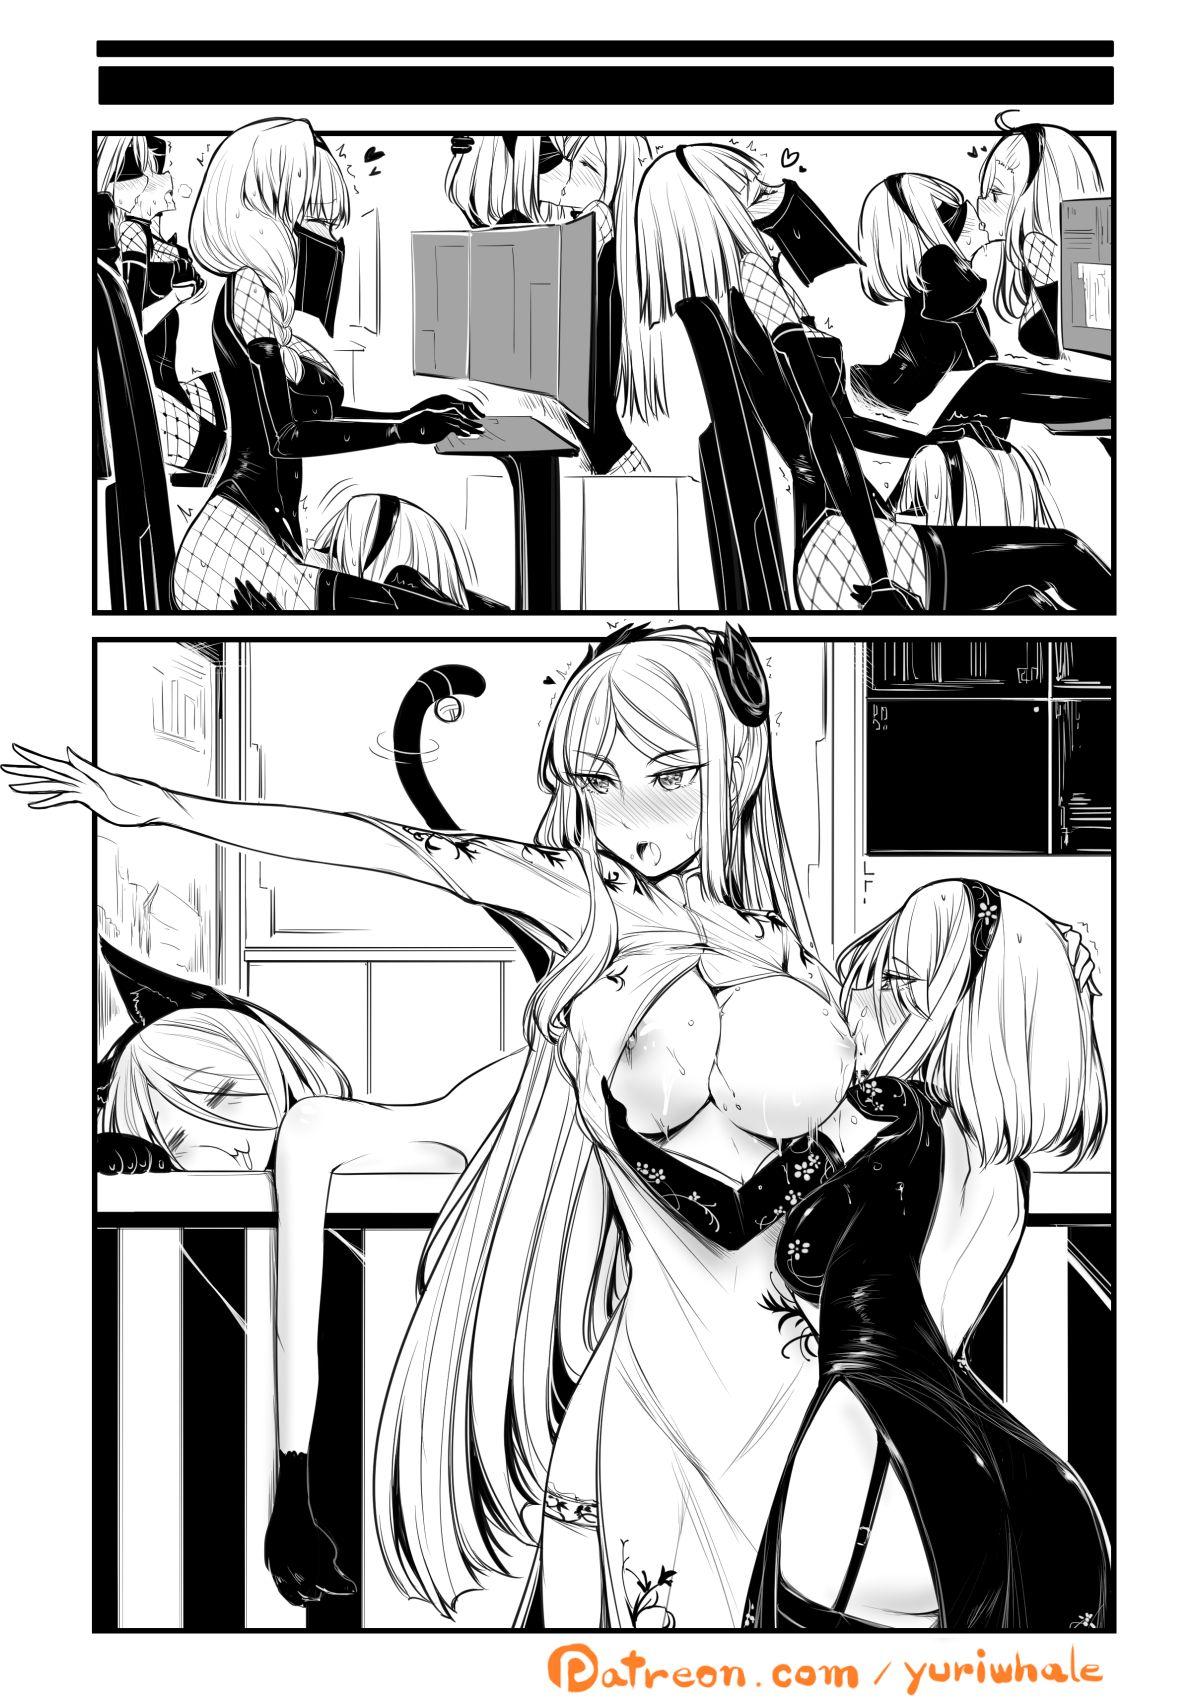 Hot Girls Getting Fucked New Support Units Nier Domina - Nier automata Socks - Page 10